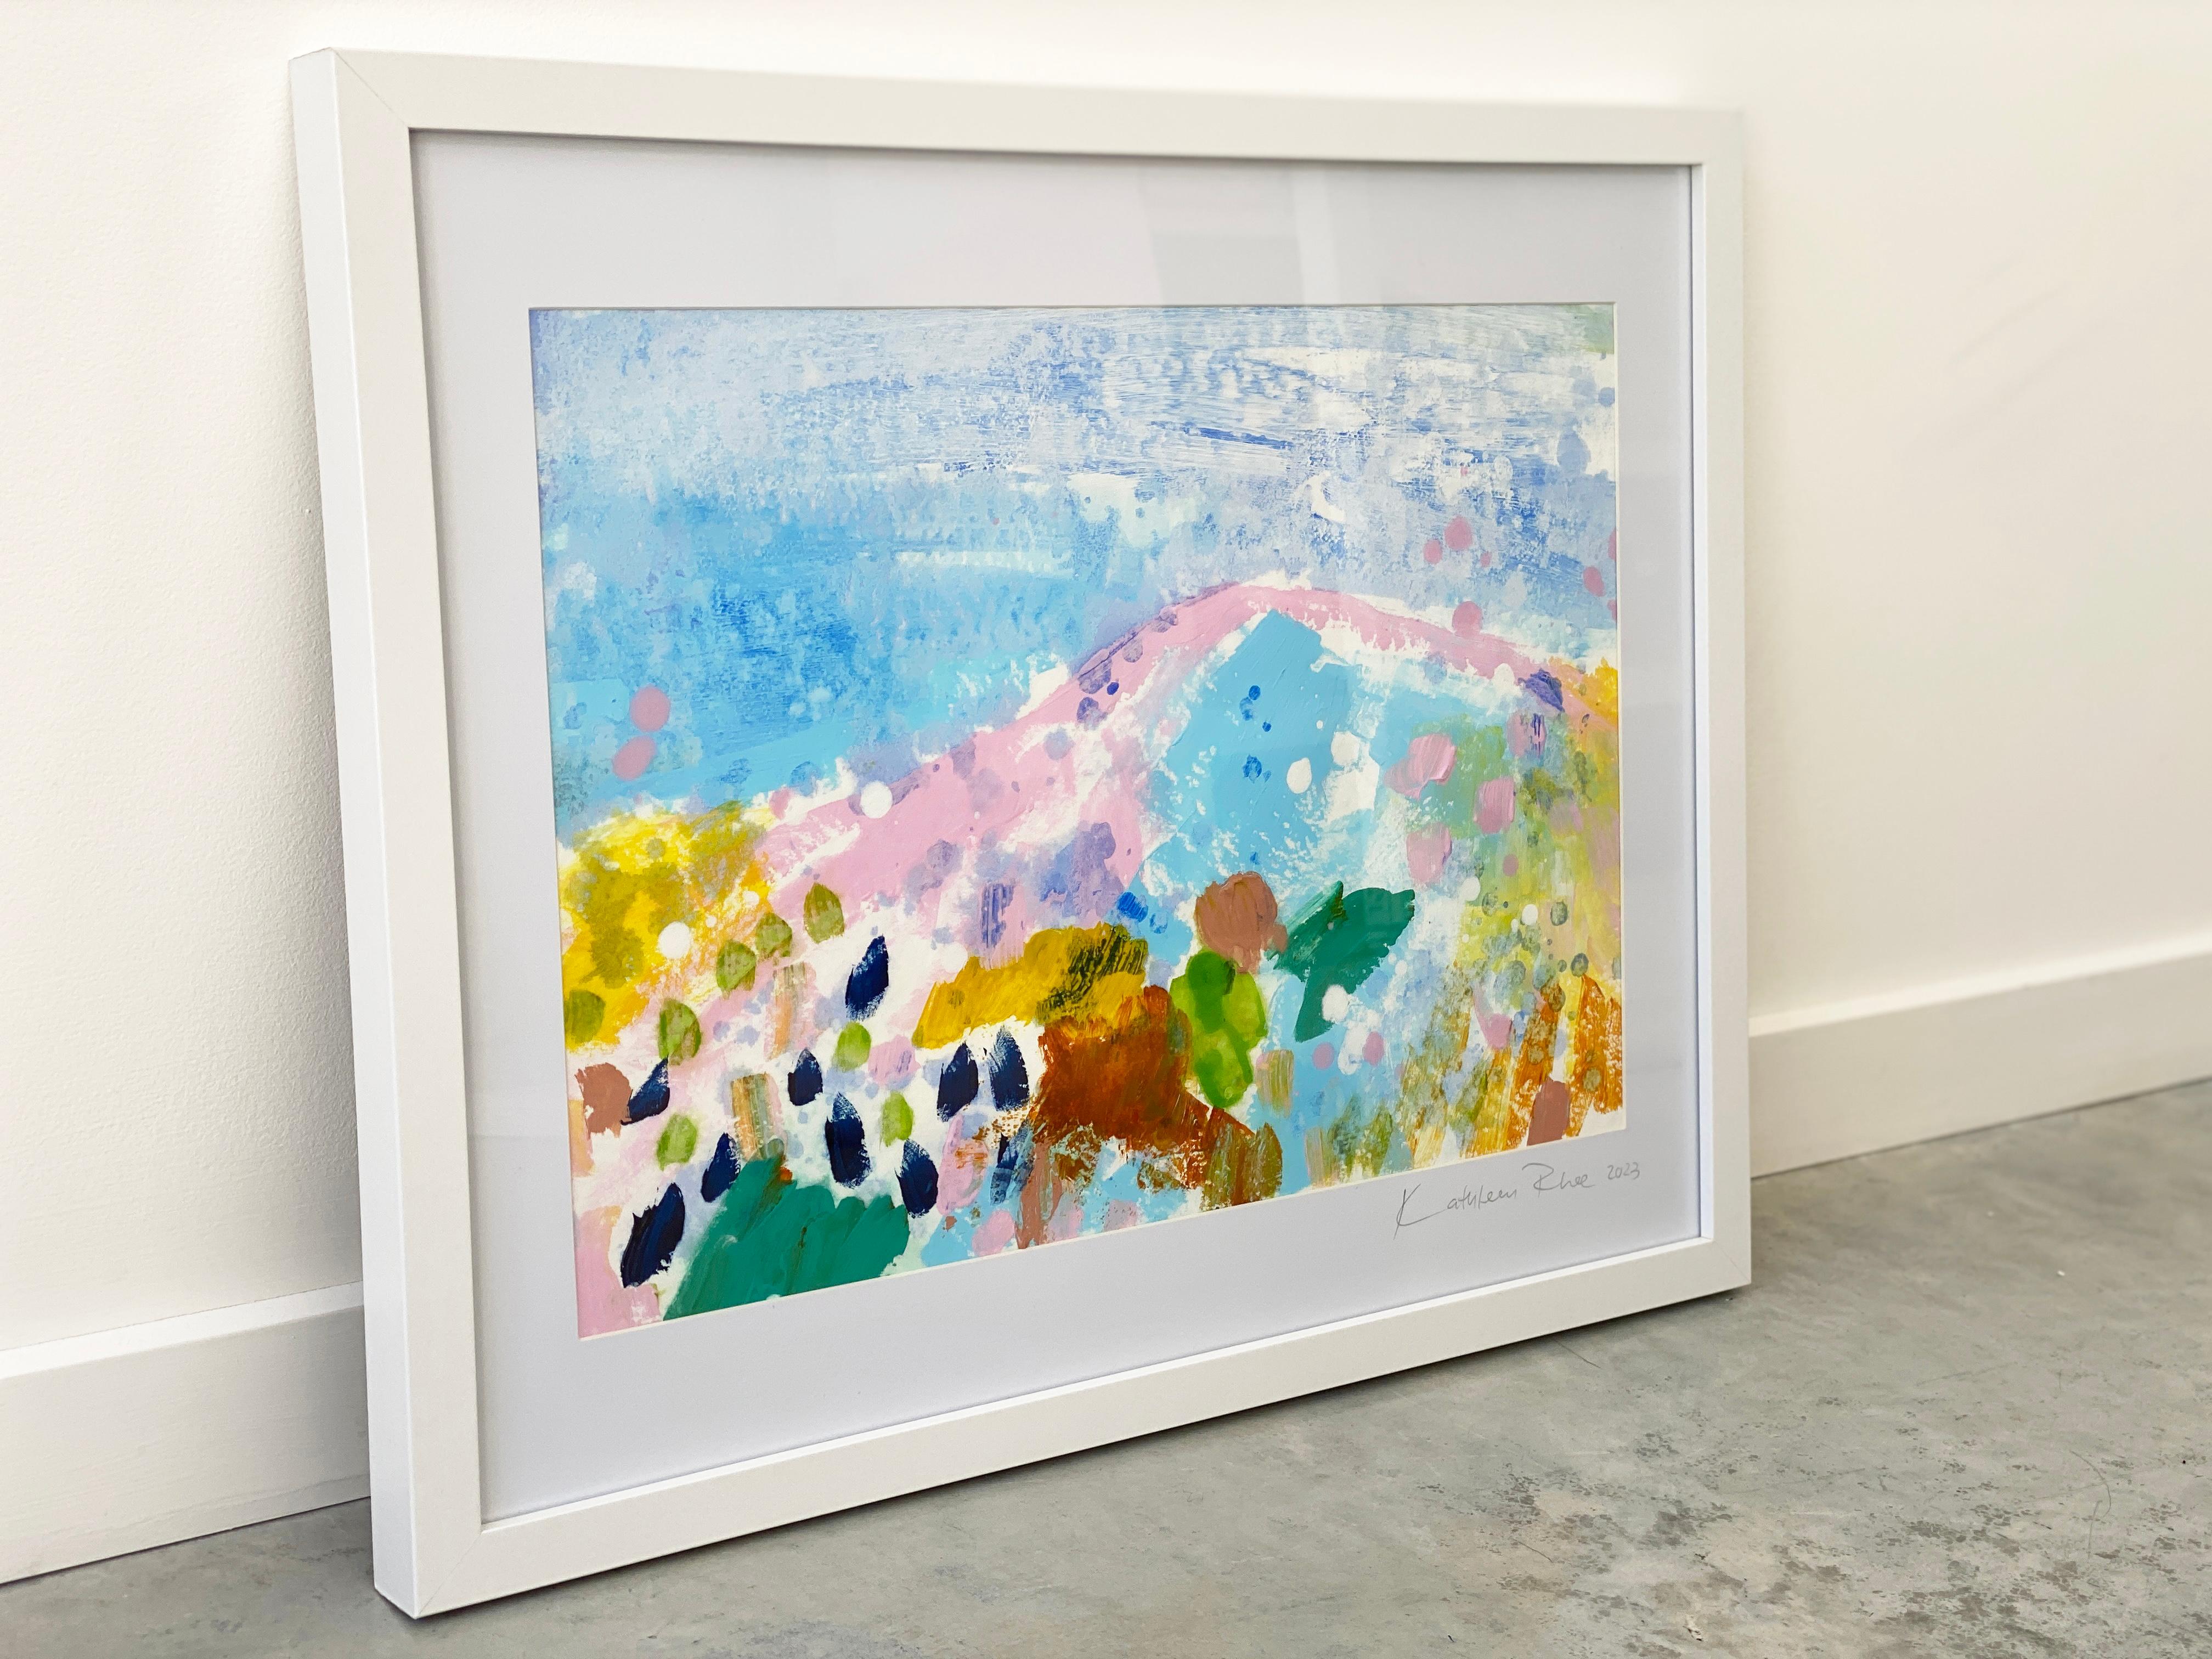 Matisse Mountains no1 abstract impressionist landscape in pastel colors on fine art paper, framed in white. A sweet happy original painting to add light and joy to any room or small wall space. Inspired by the Matisse pastel color palette, quiet